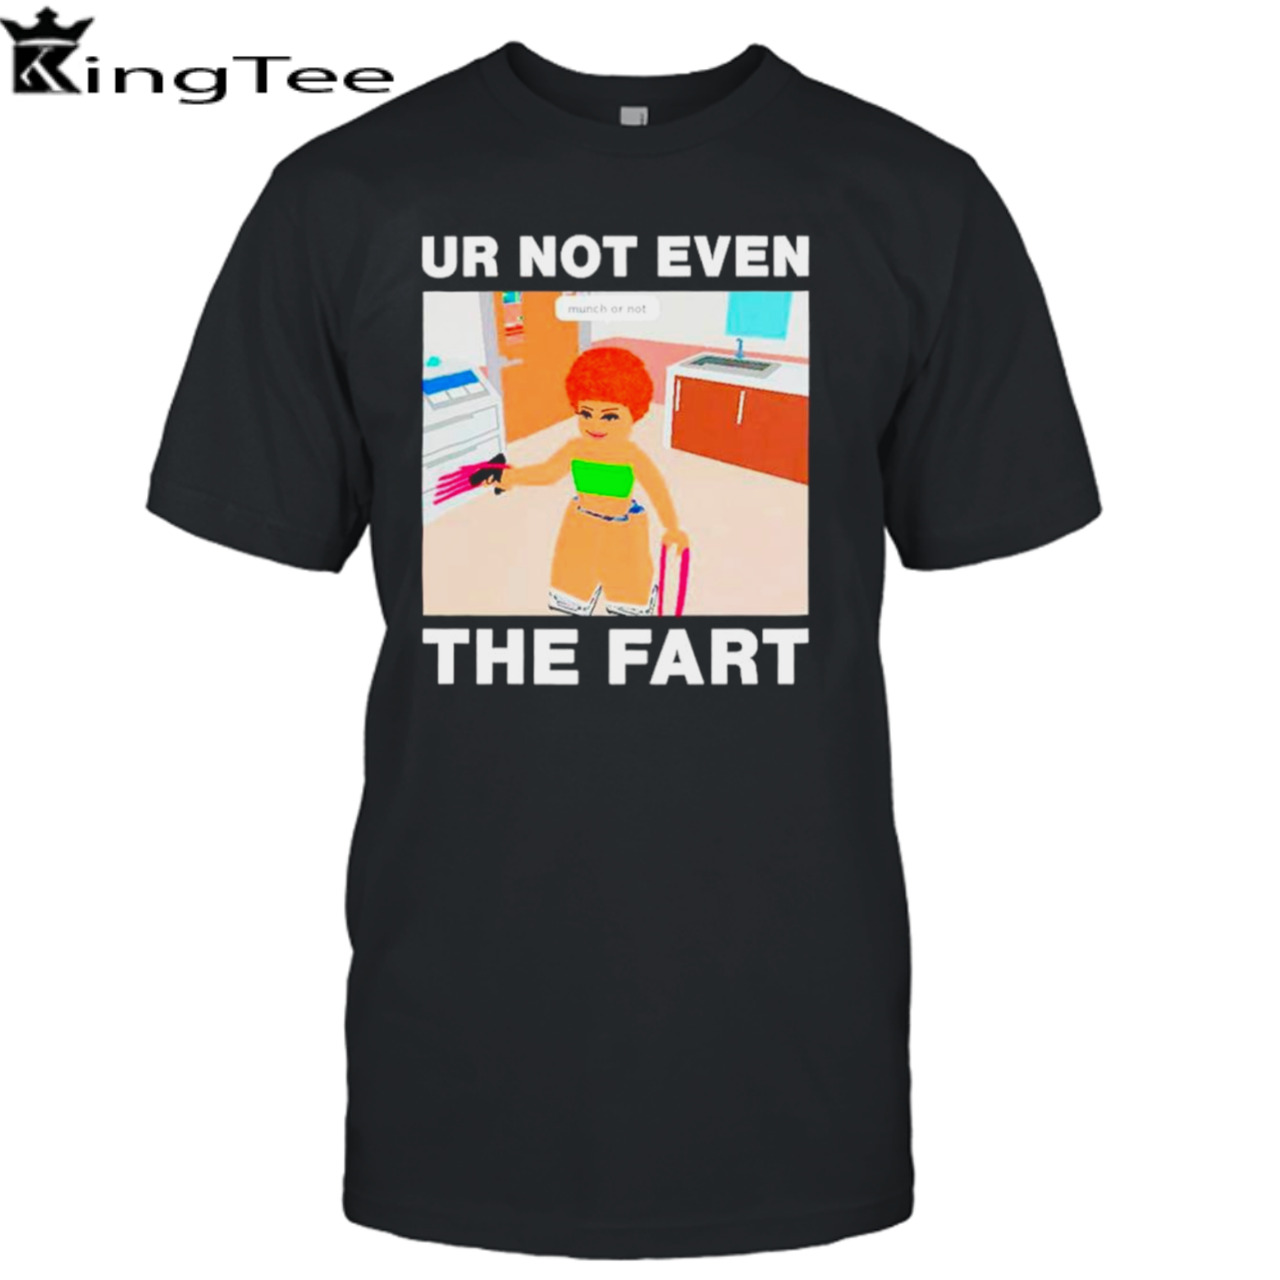 Ur not even the fart ice spice shirt